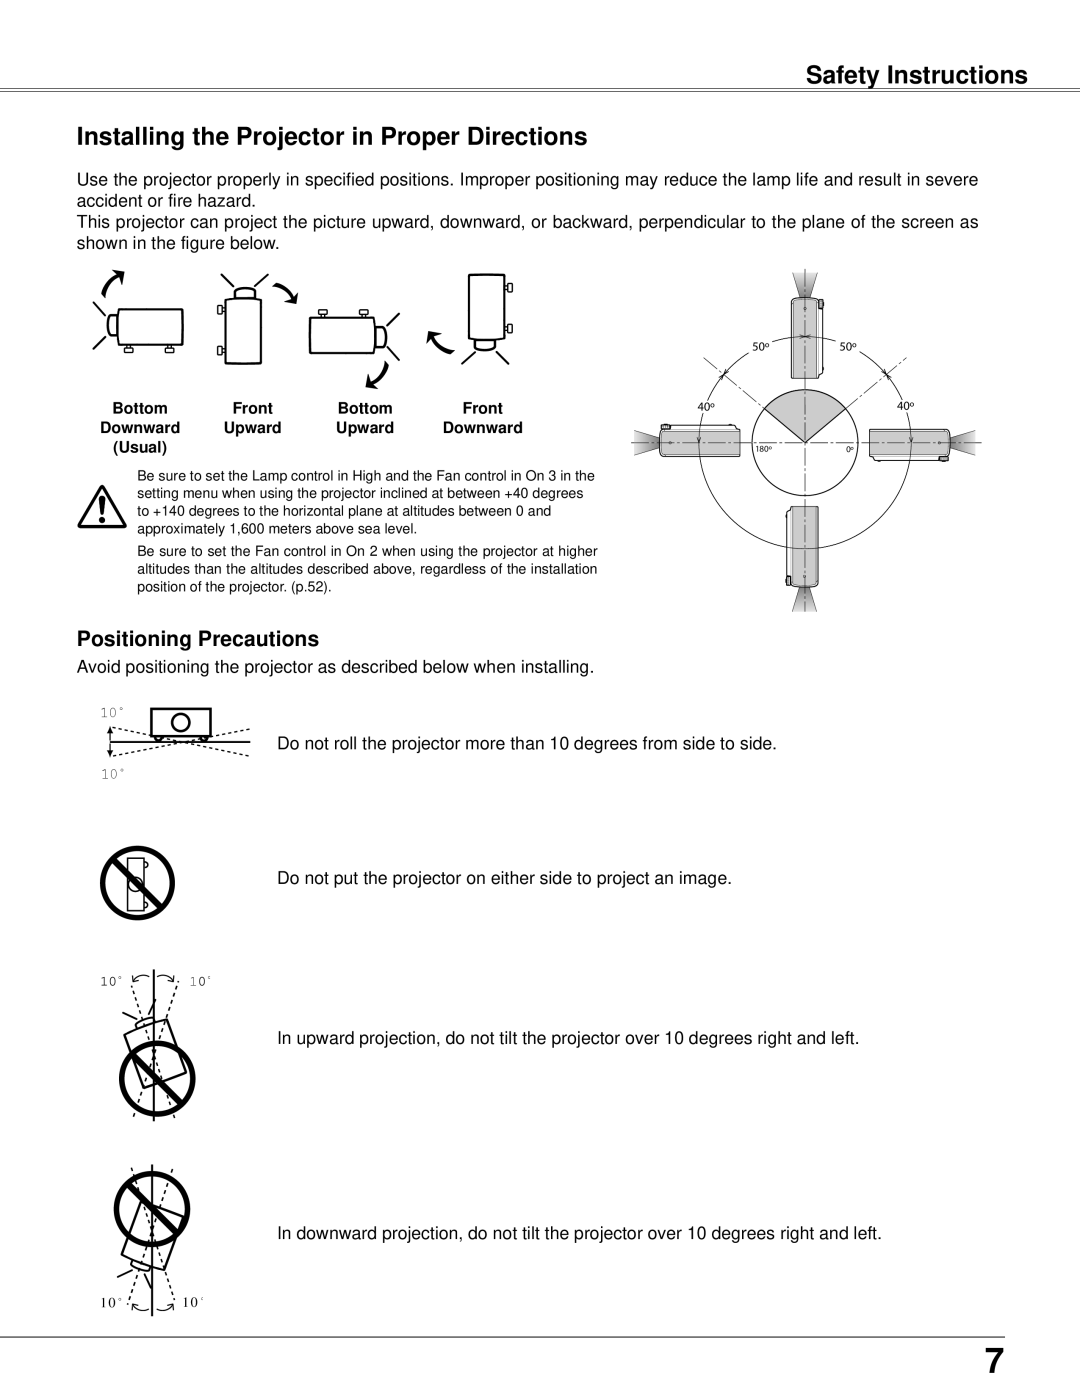 Eiki LC-XB42 owner manual Safety Instructions Installing the Projector in Proper Directions, Positioning Precautions 